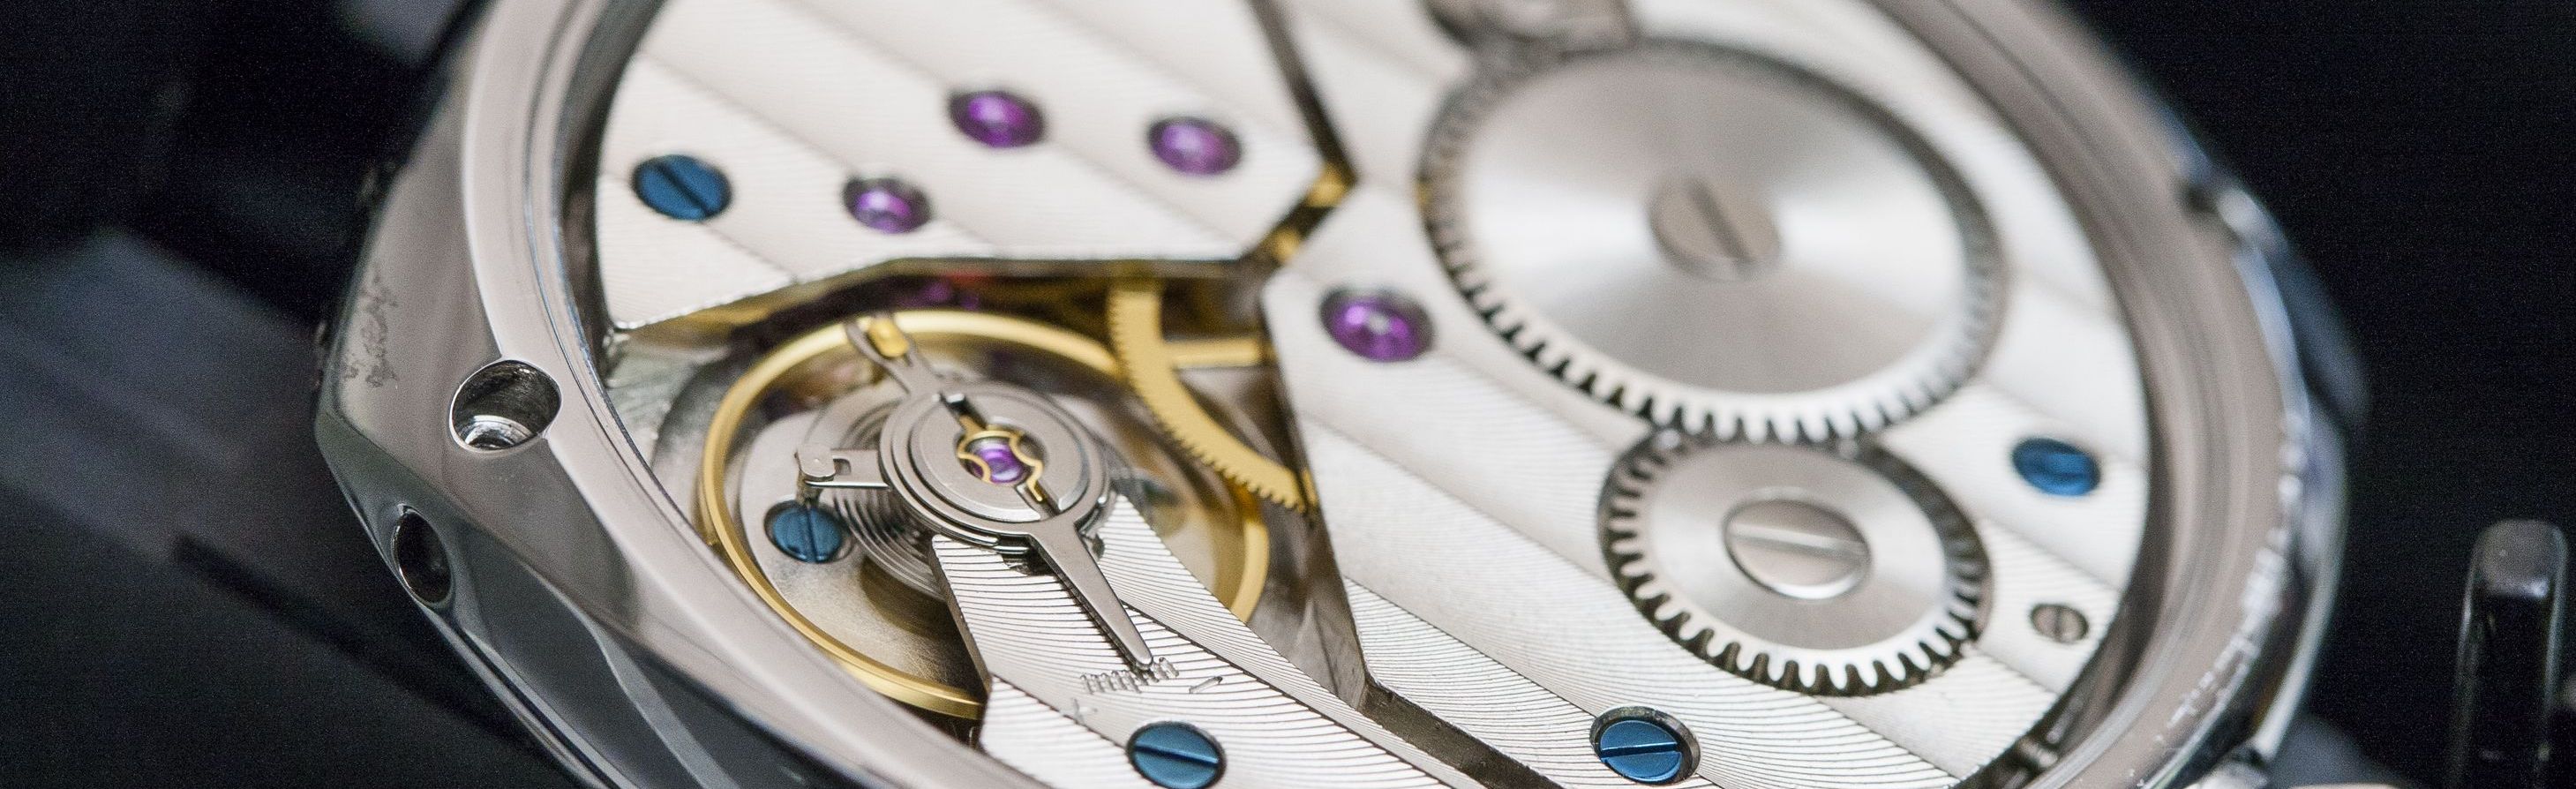 Assembly of mechanical watches